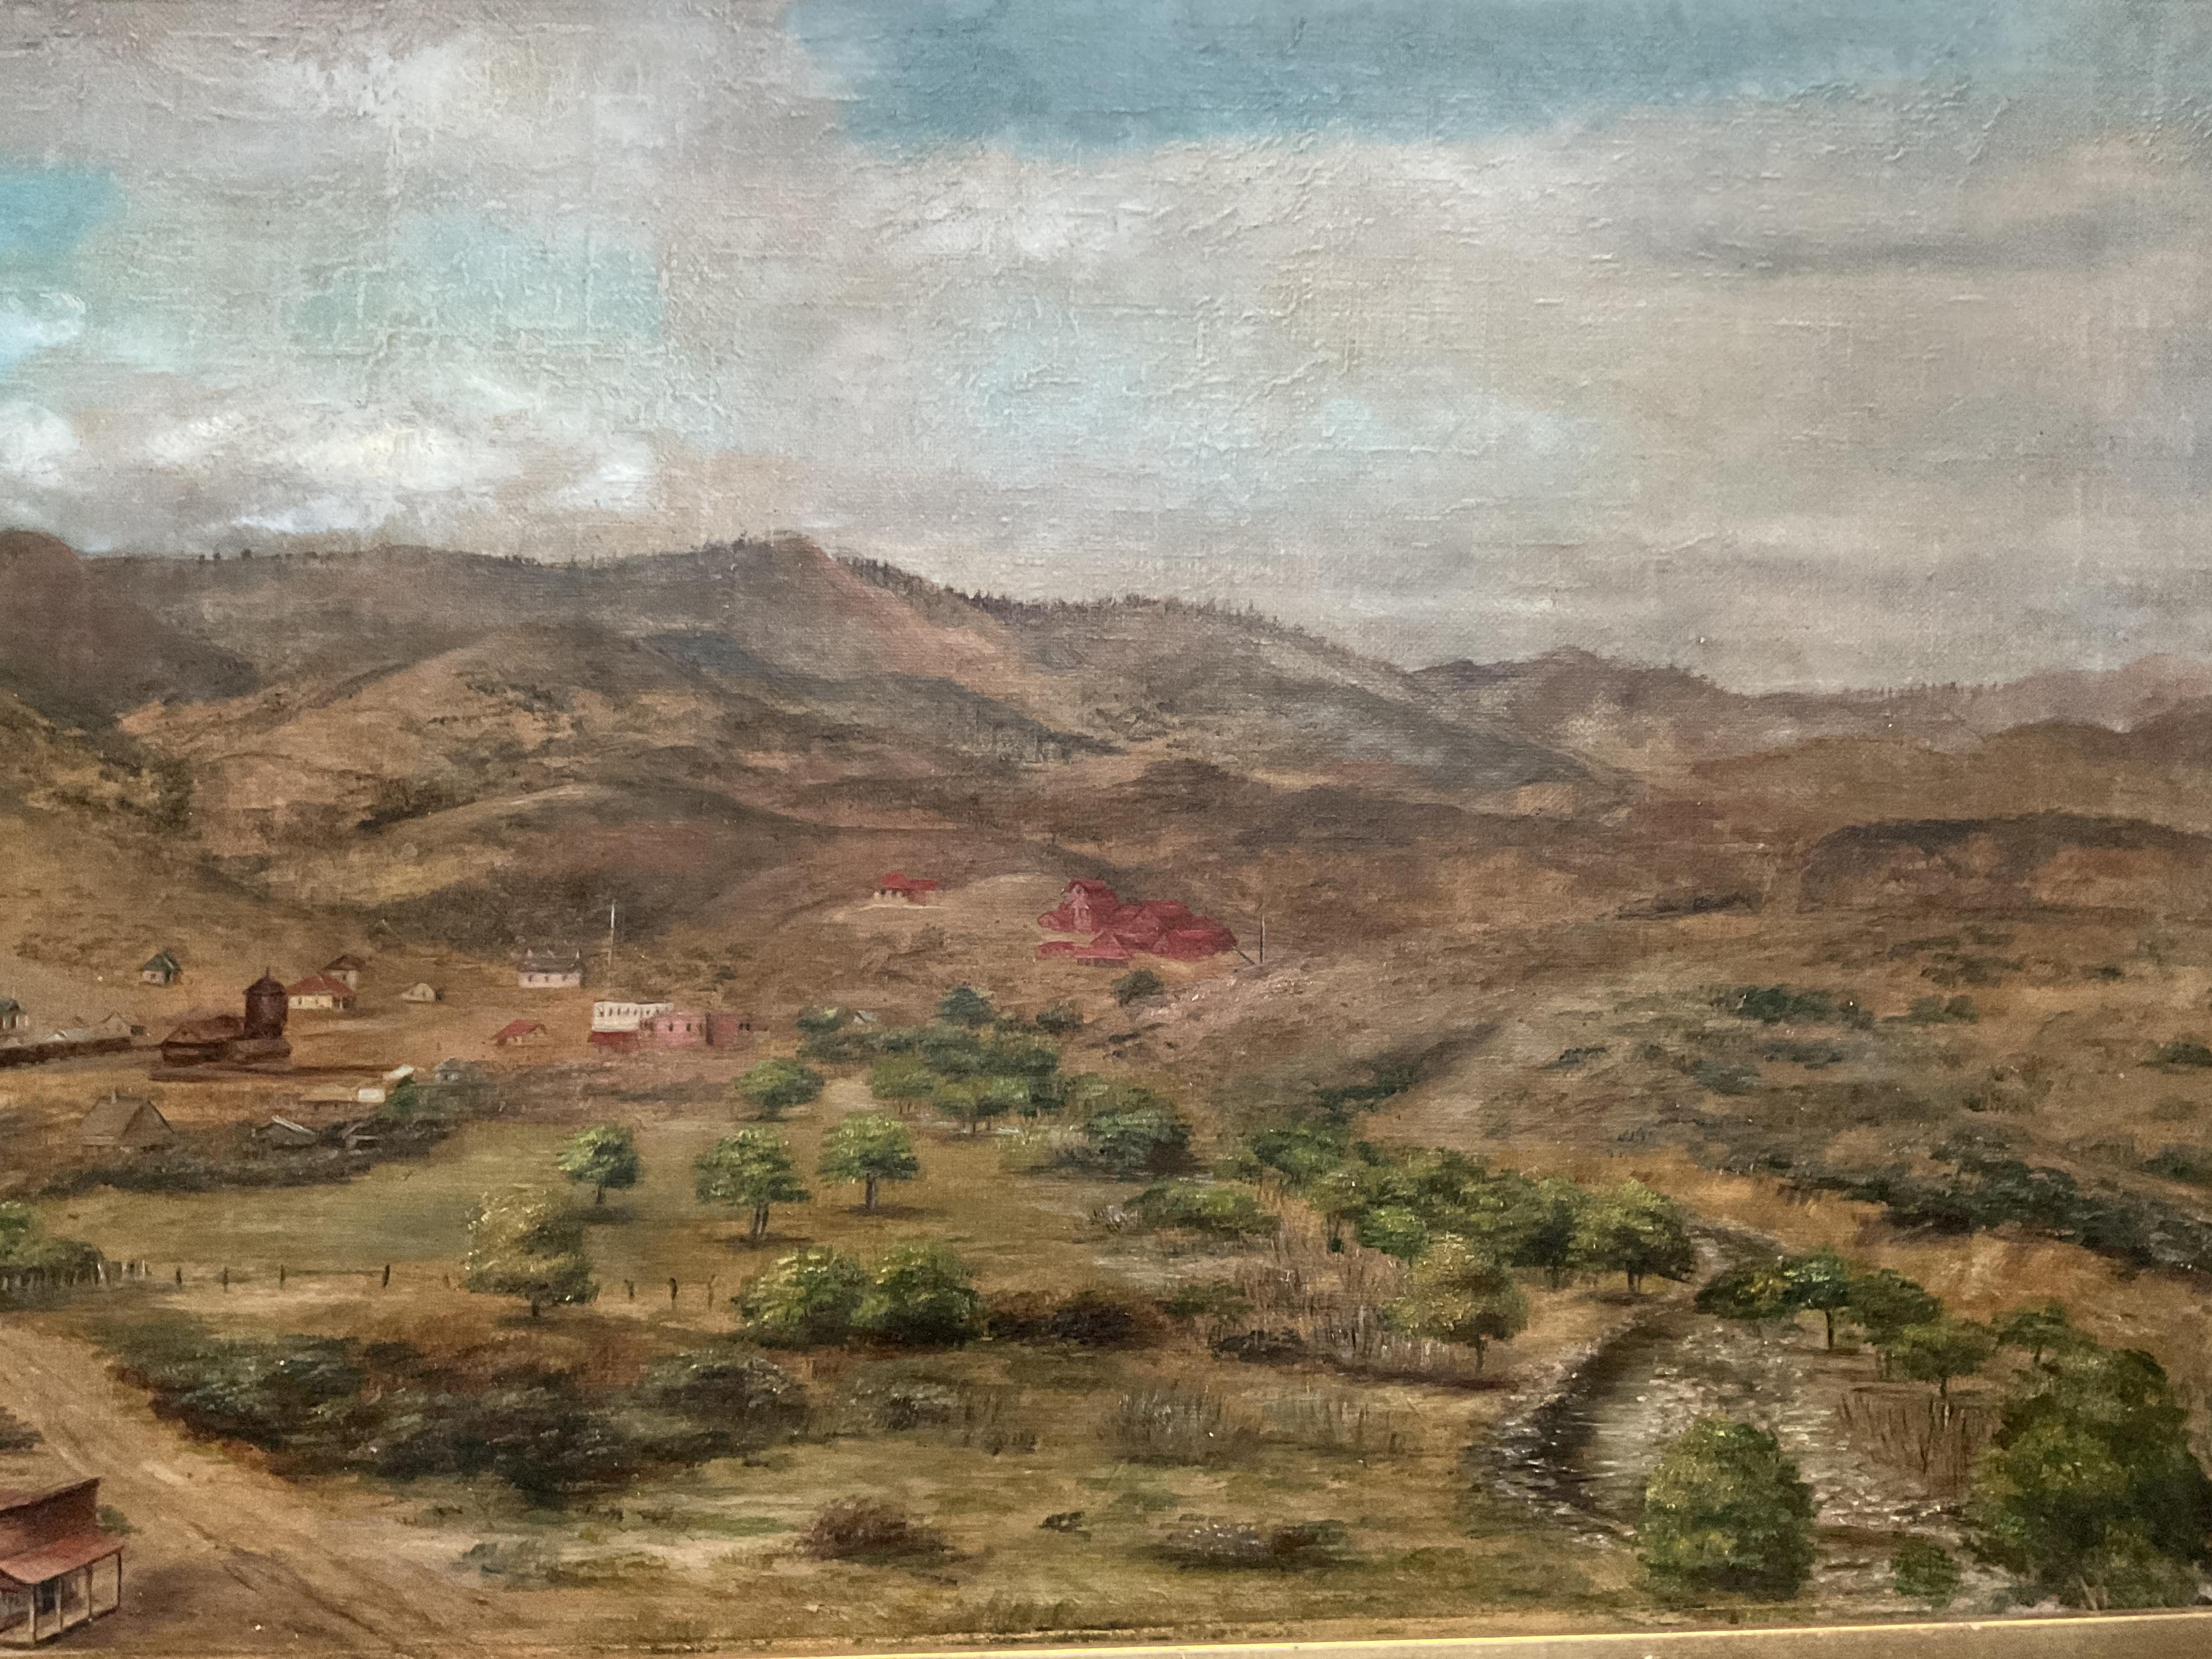 This rare and unusual landscape painting shows a broad view of a mining town and its setting in the Western United States, most likely California or Arizona.  It is signed by listed California artist Minerva Treadwell and dated 1905.

Minerva